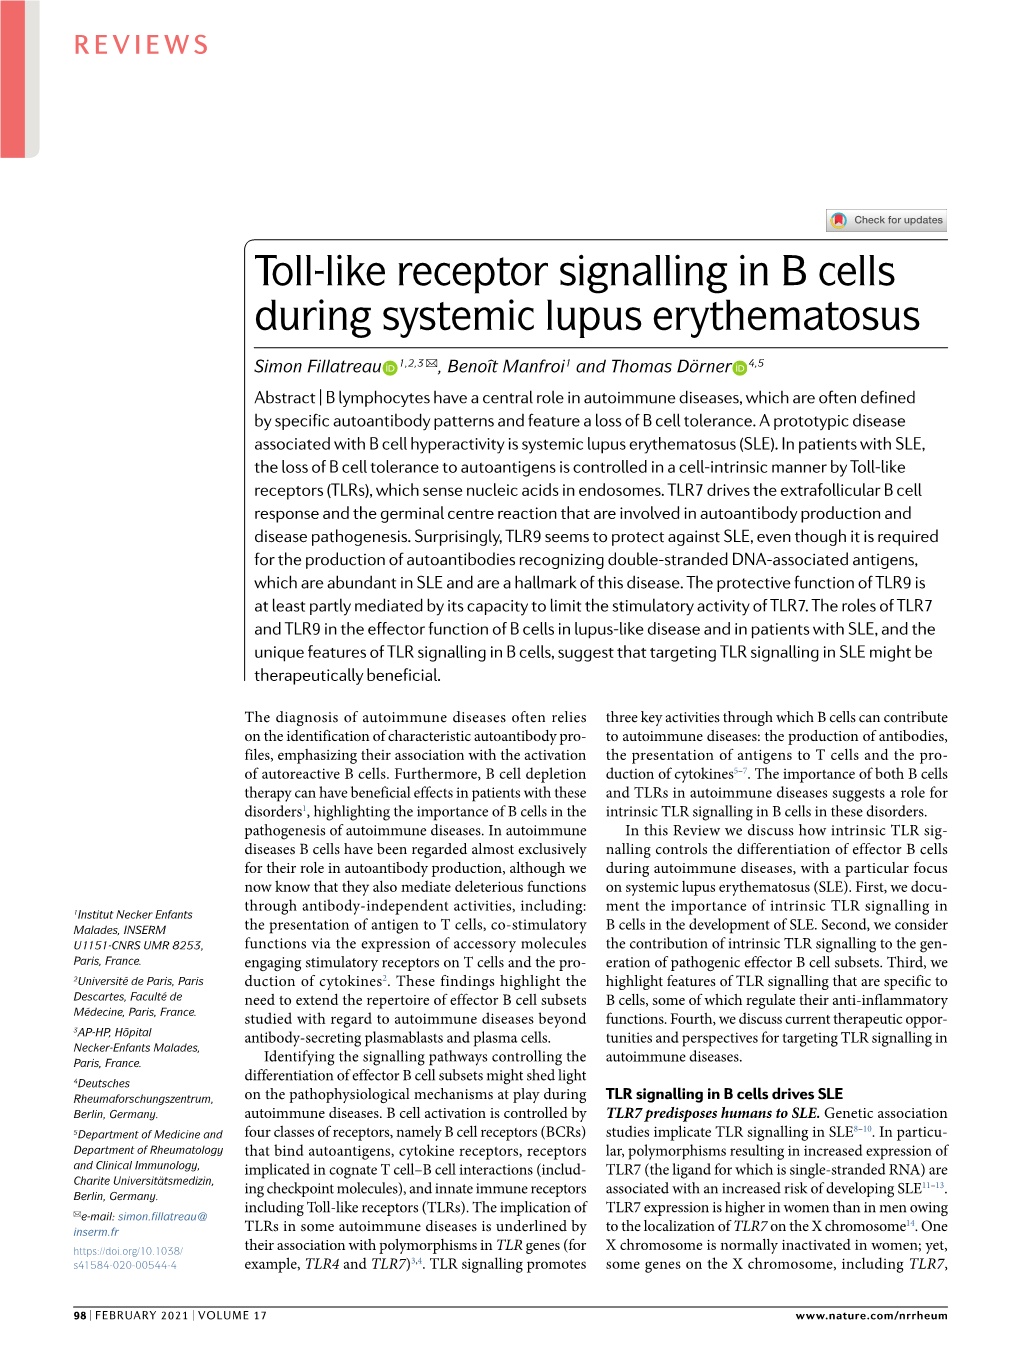 Toll-Like Receptor Signalling in B Cells During Systemic Lupus Erythematosus